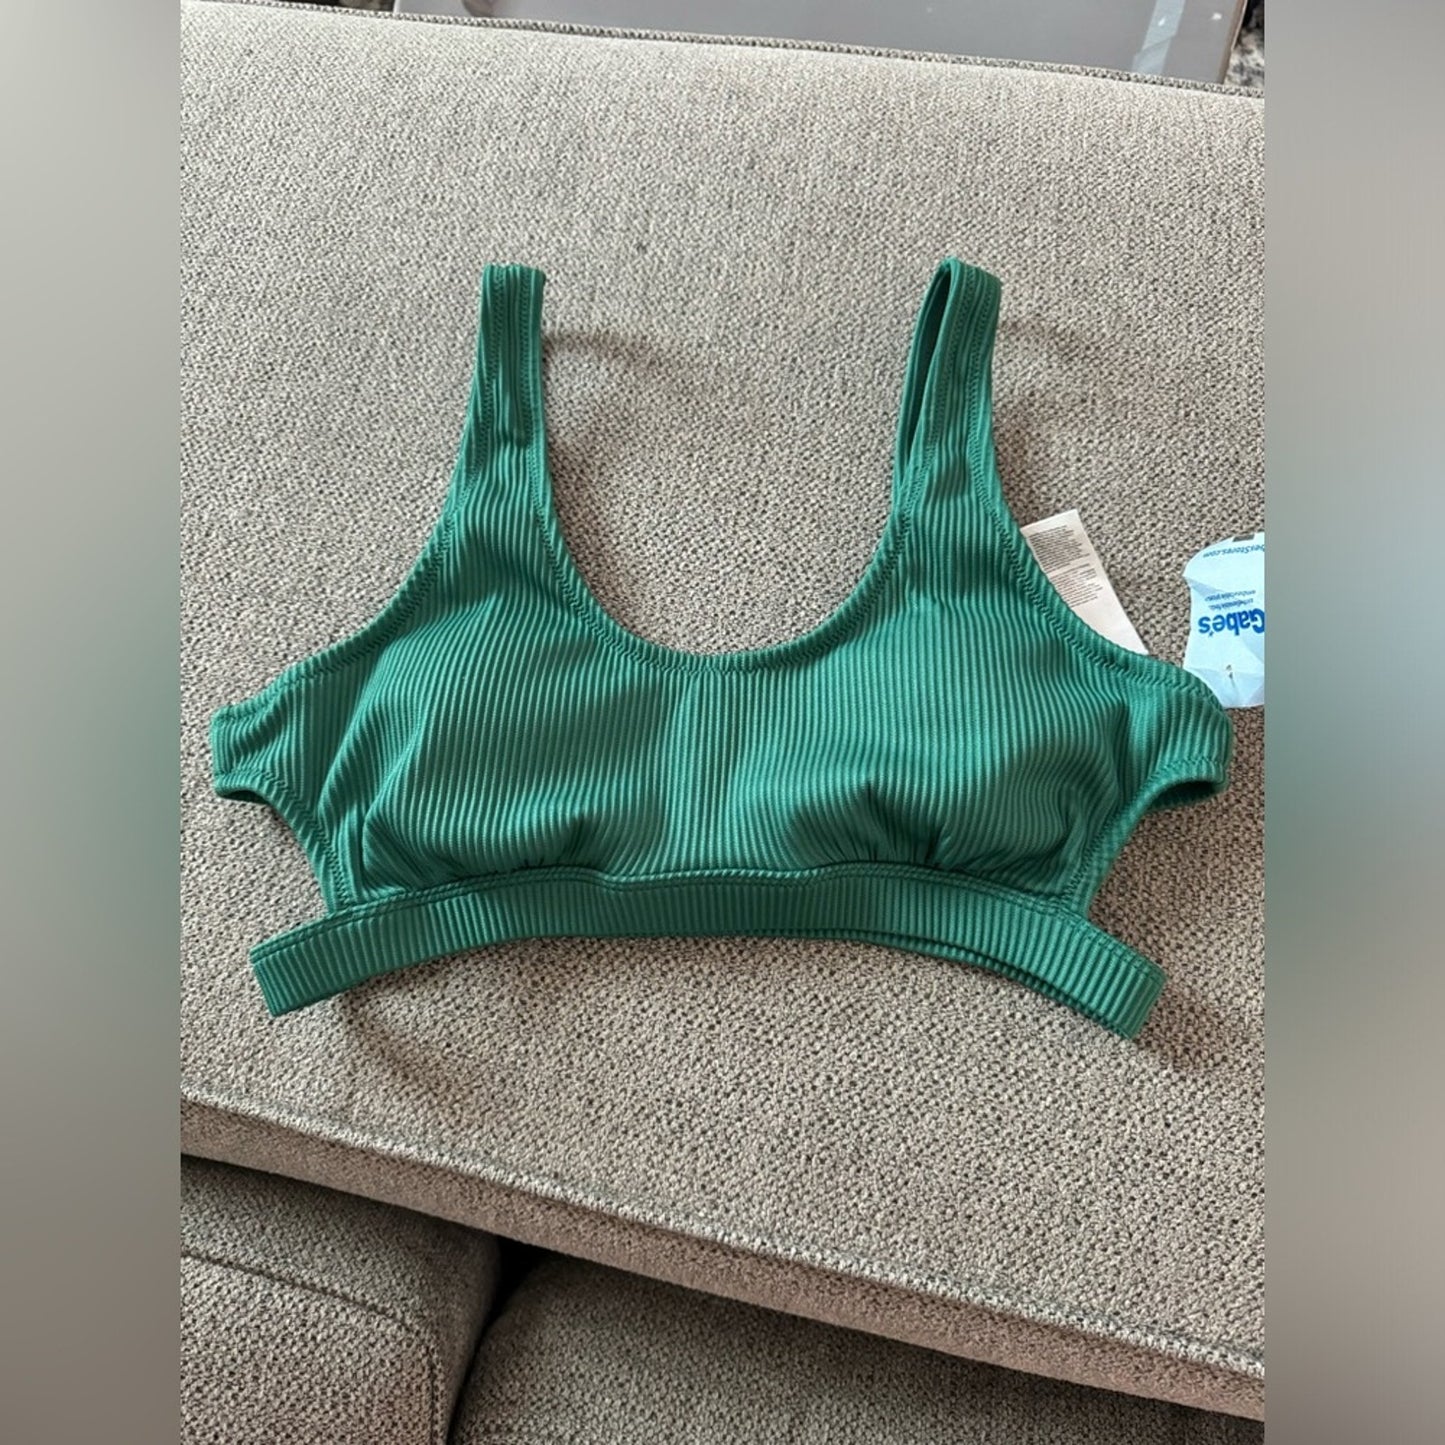 NWT LG Cupshe Green Ribbed Bathing Suit Top